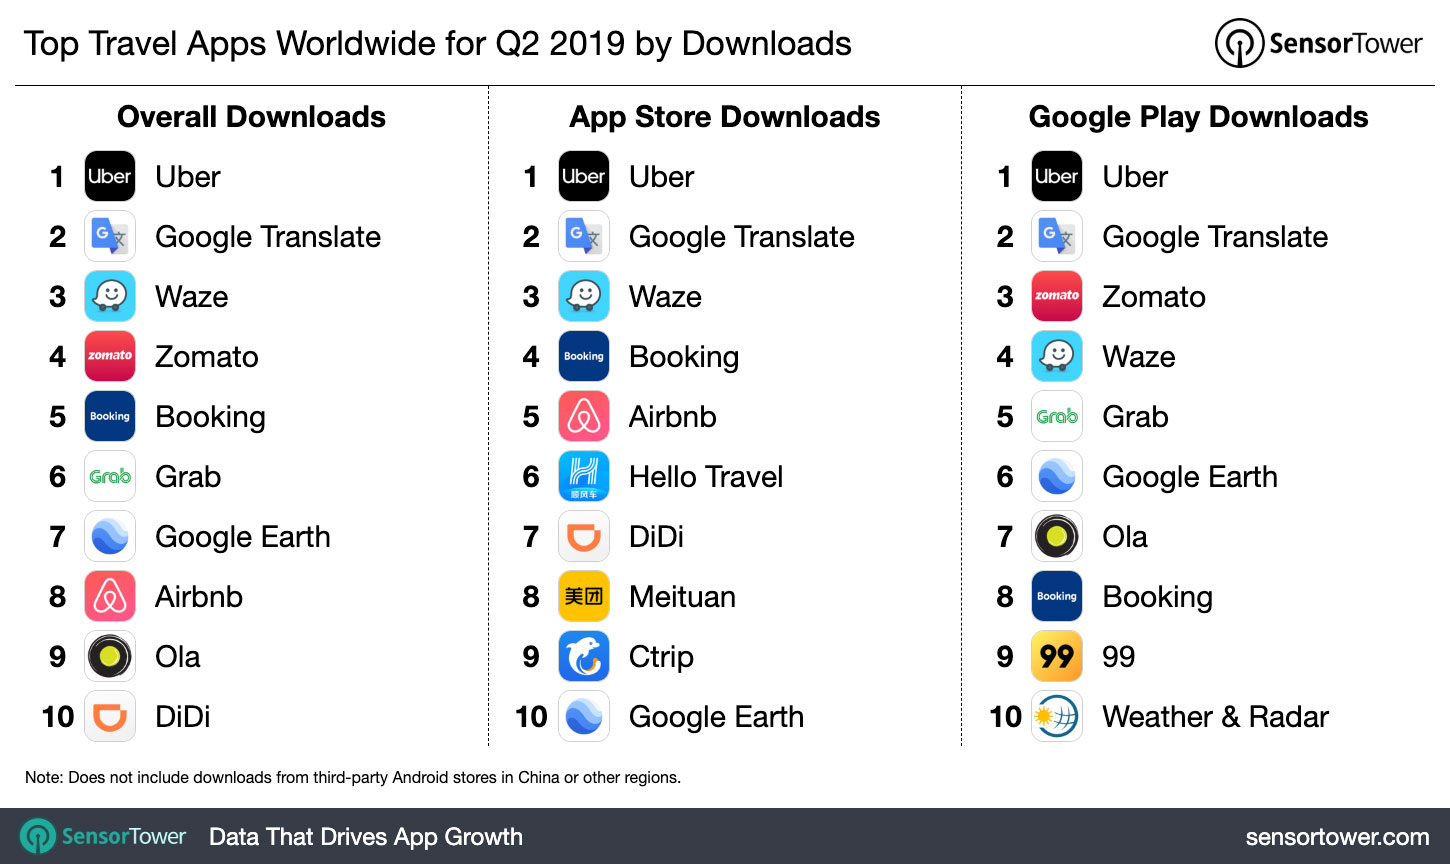 Top Travel category Apps Worldwide for Q2 2019 by Downloads